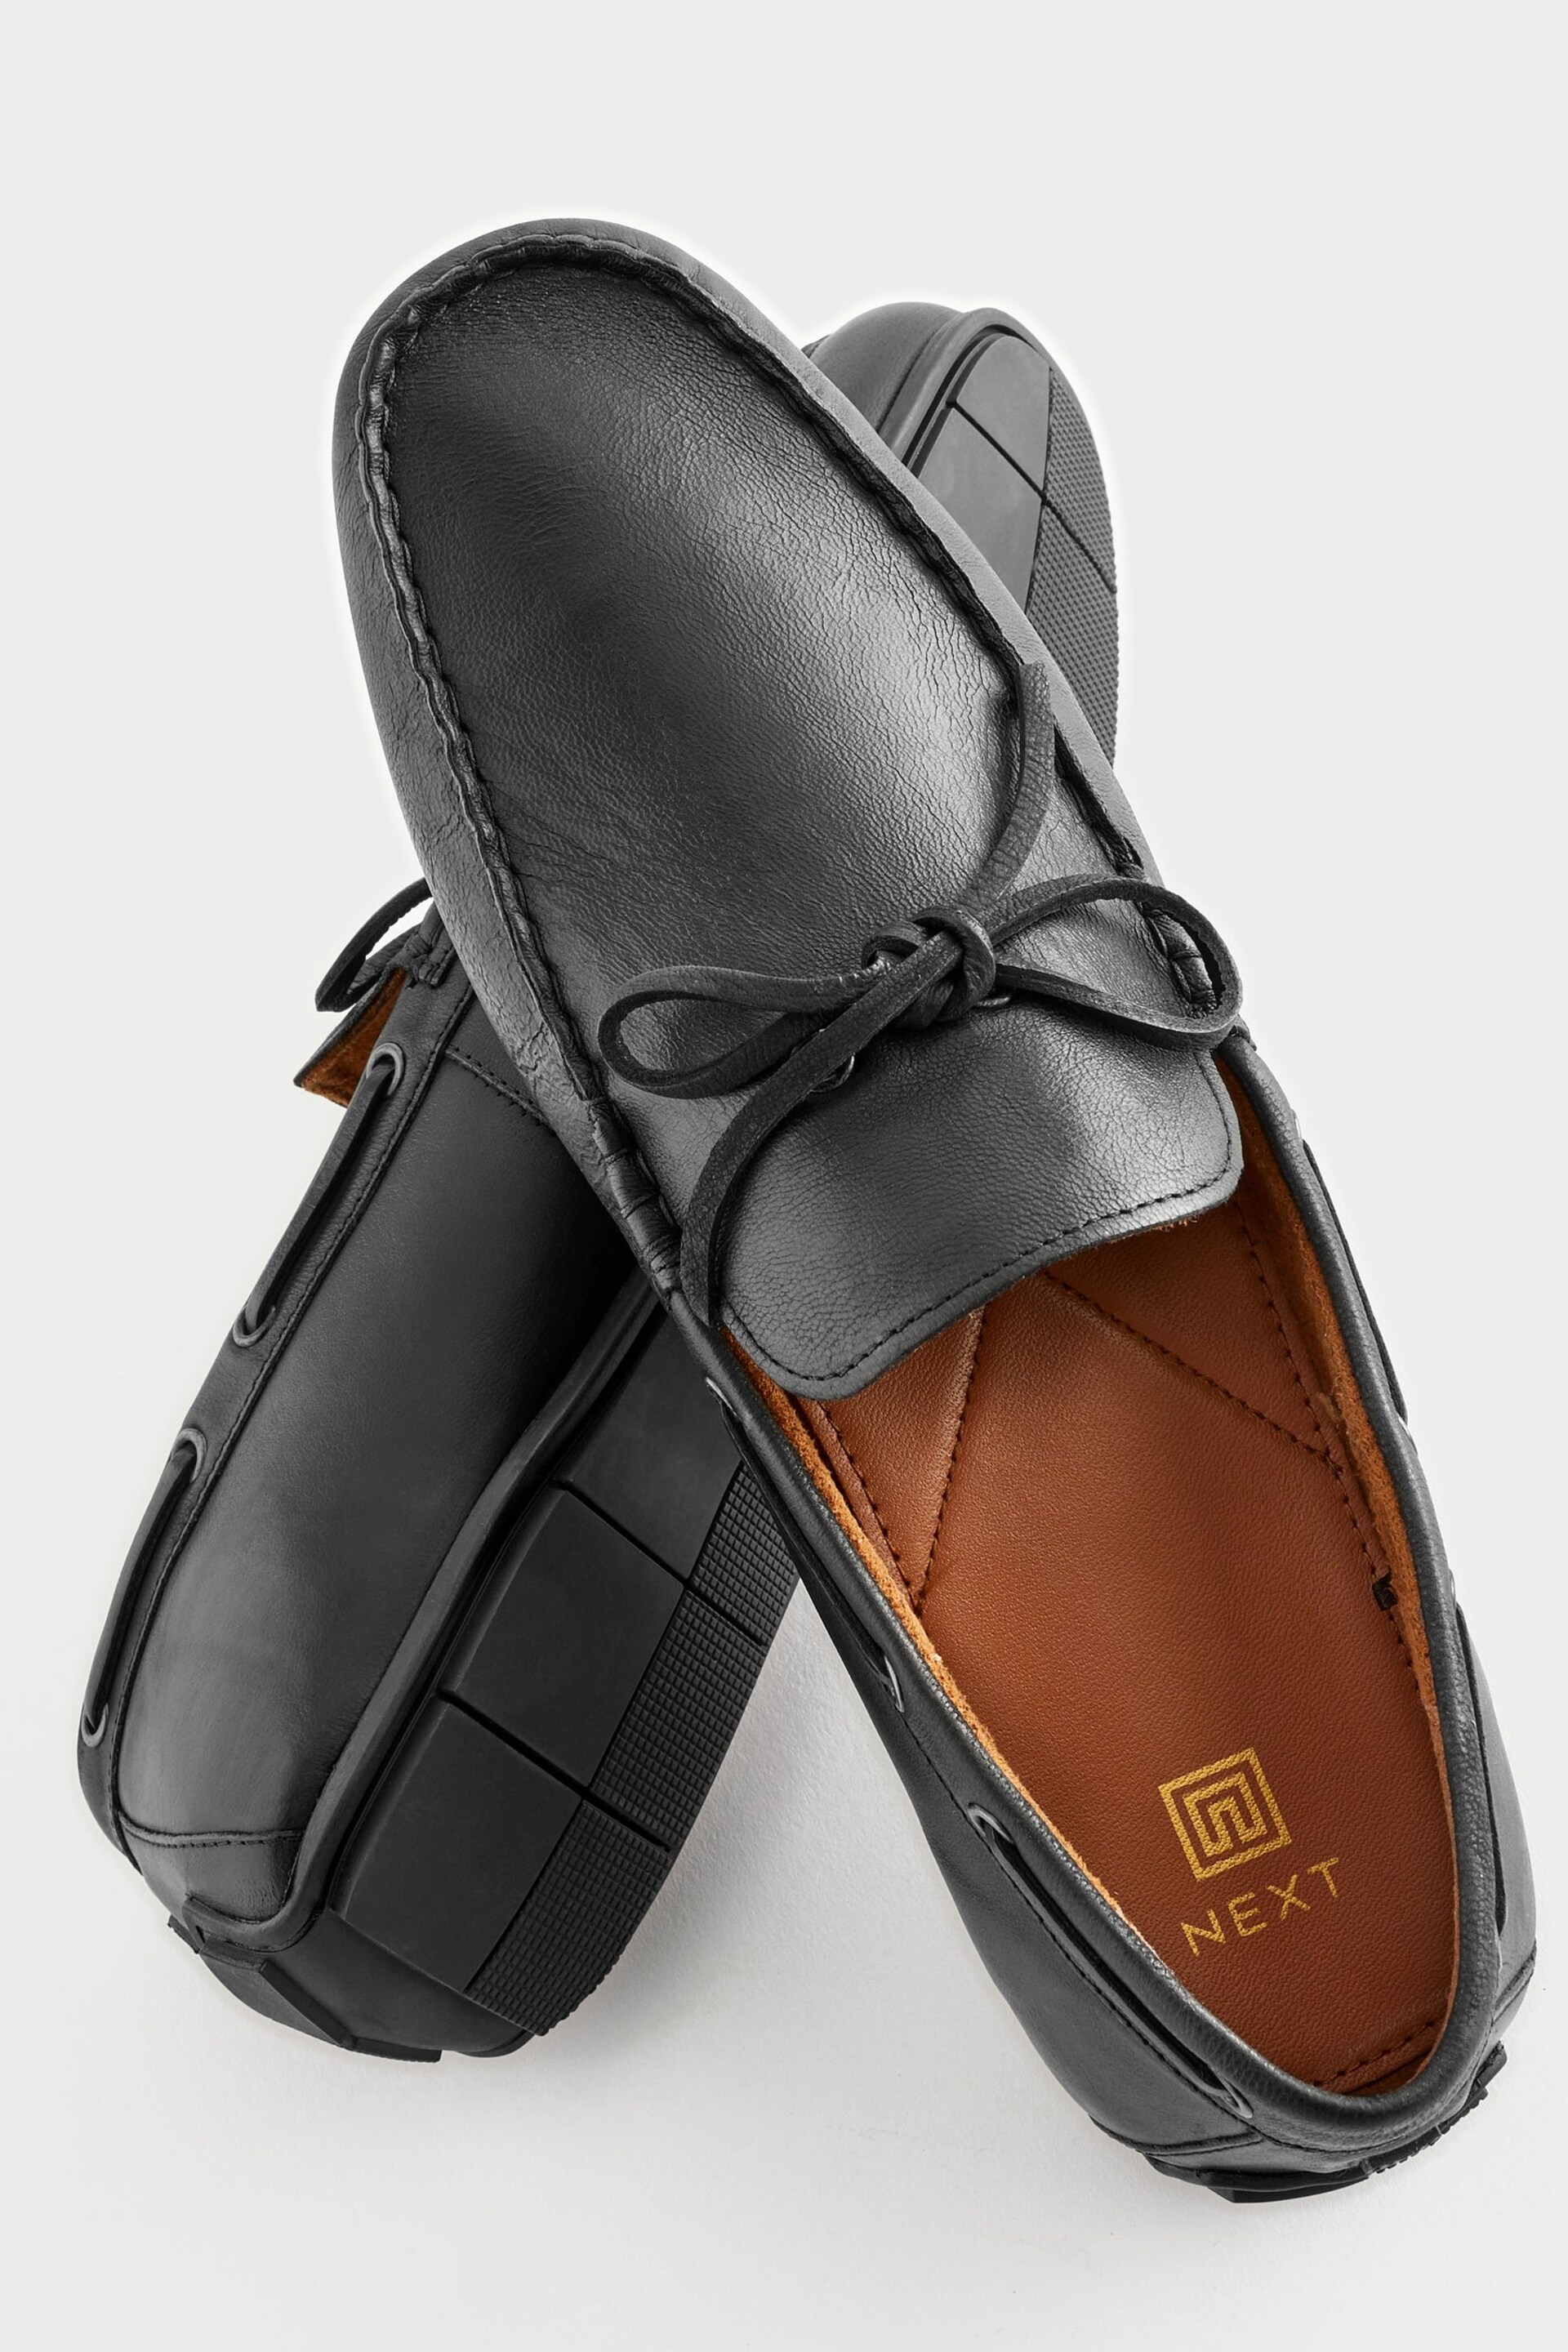 Black Leather Driving Shoes - Image 4 of 6